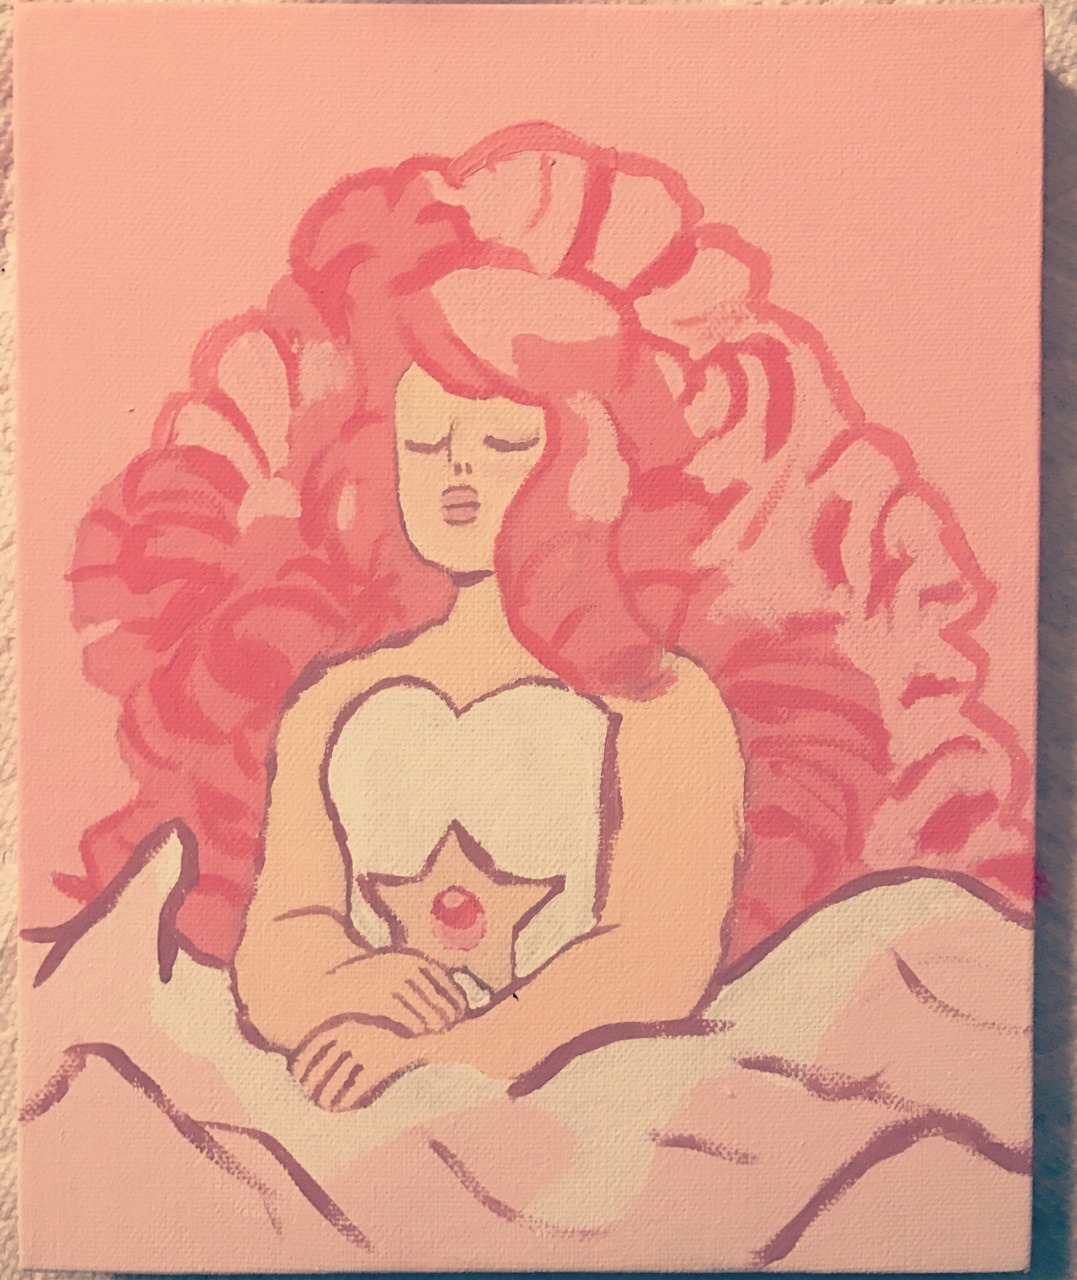 I tried to recreate that pic of rose using acrylics and a lil canvas I had